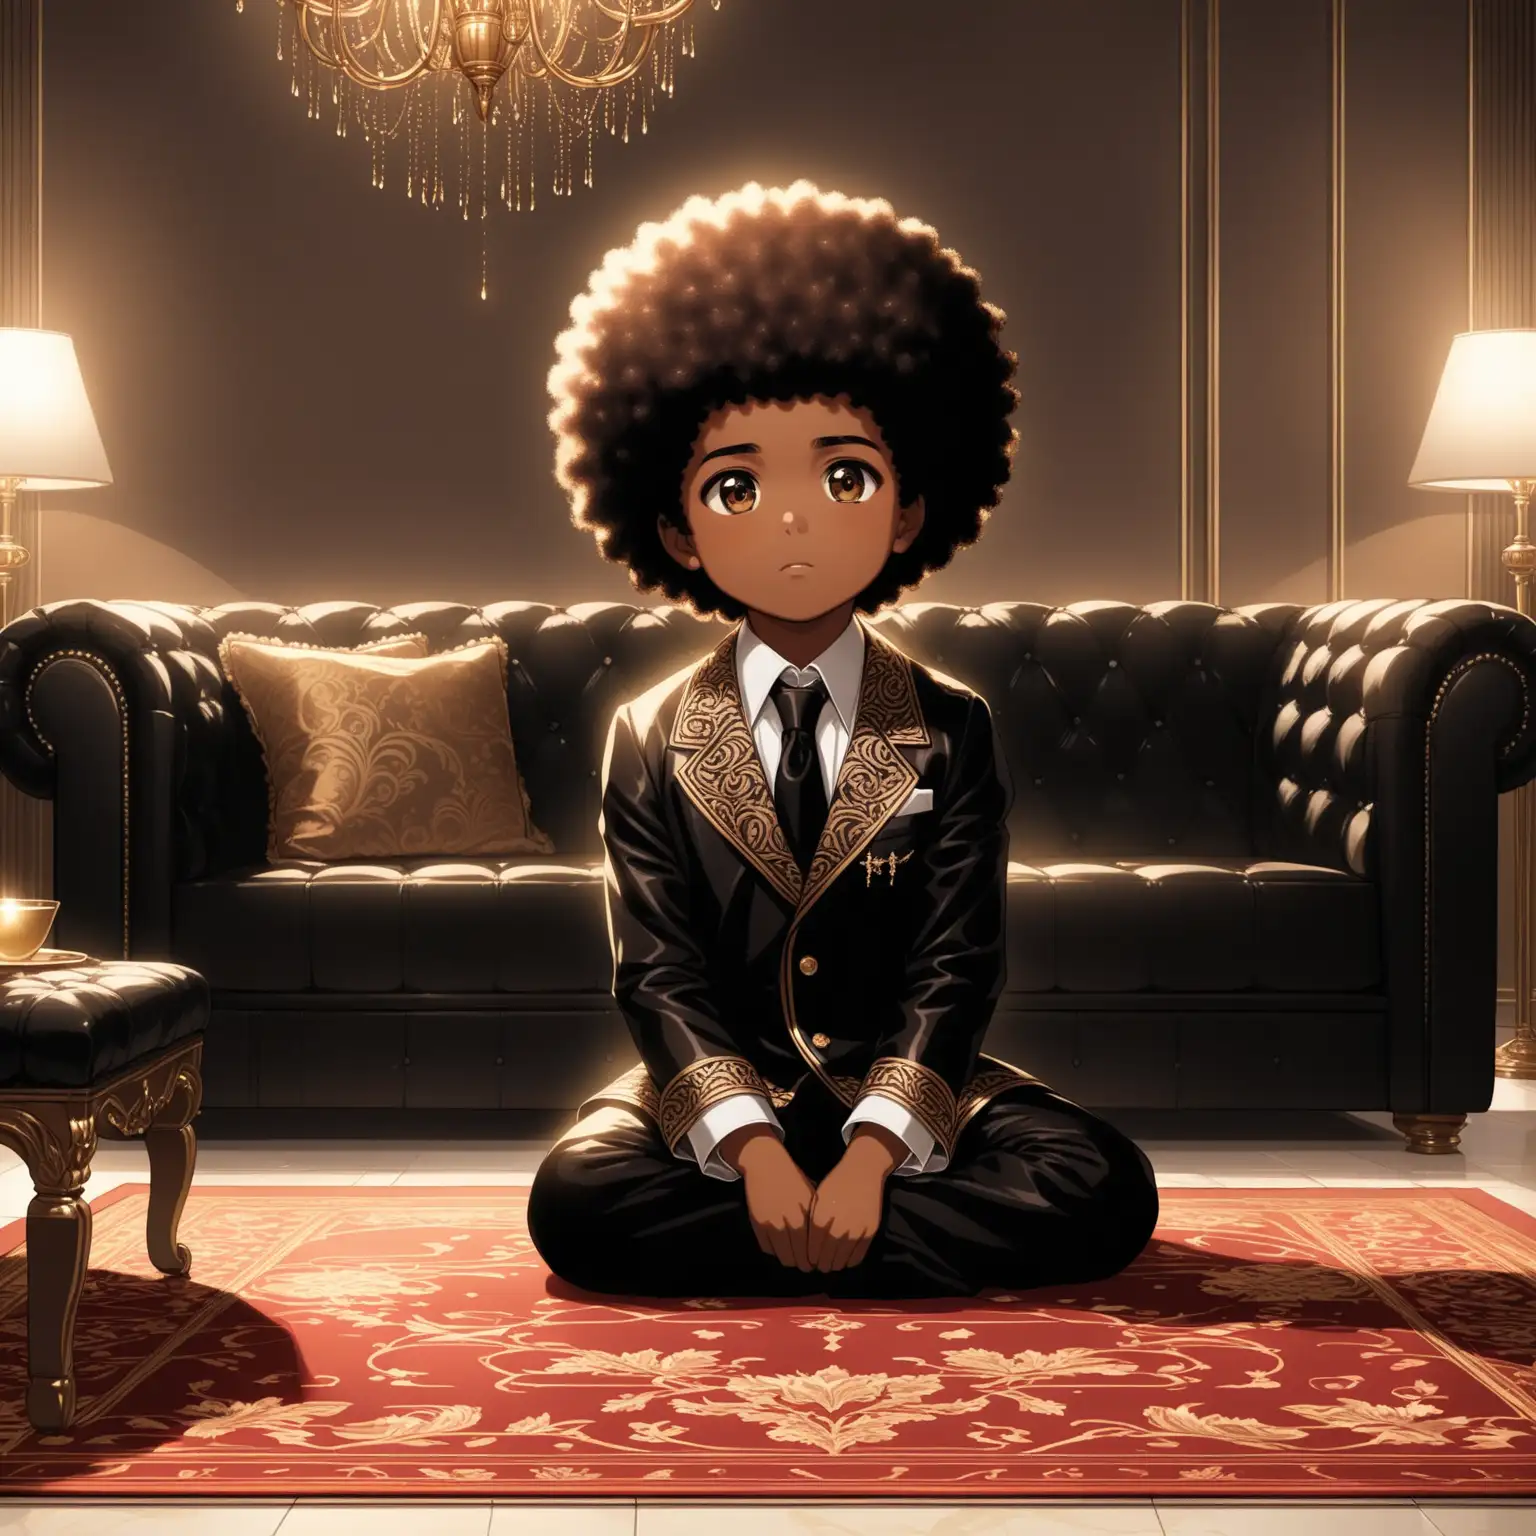 Young Boy with Afro Hair in Luxurious Living Room